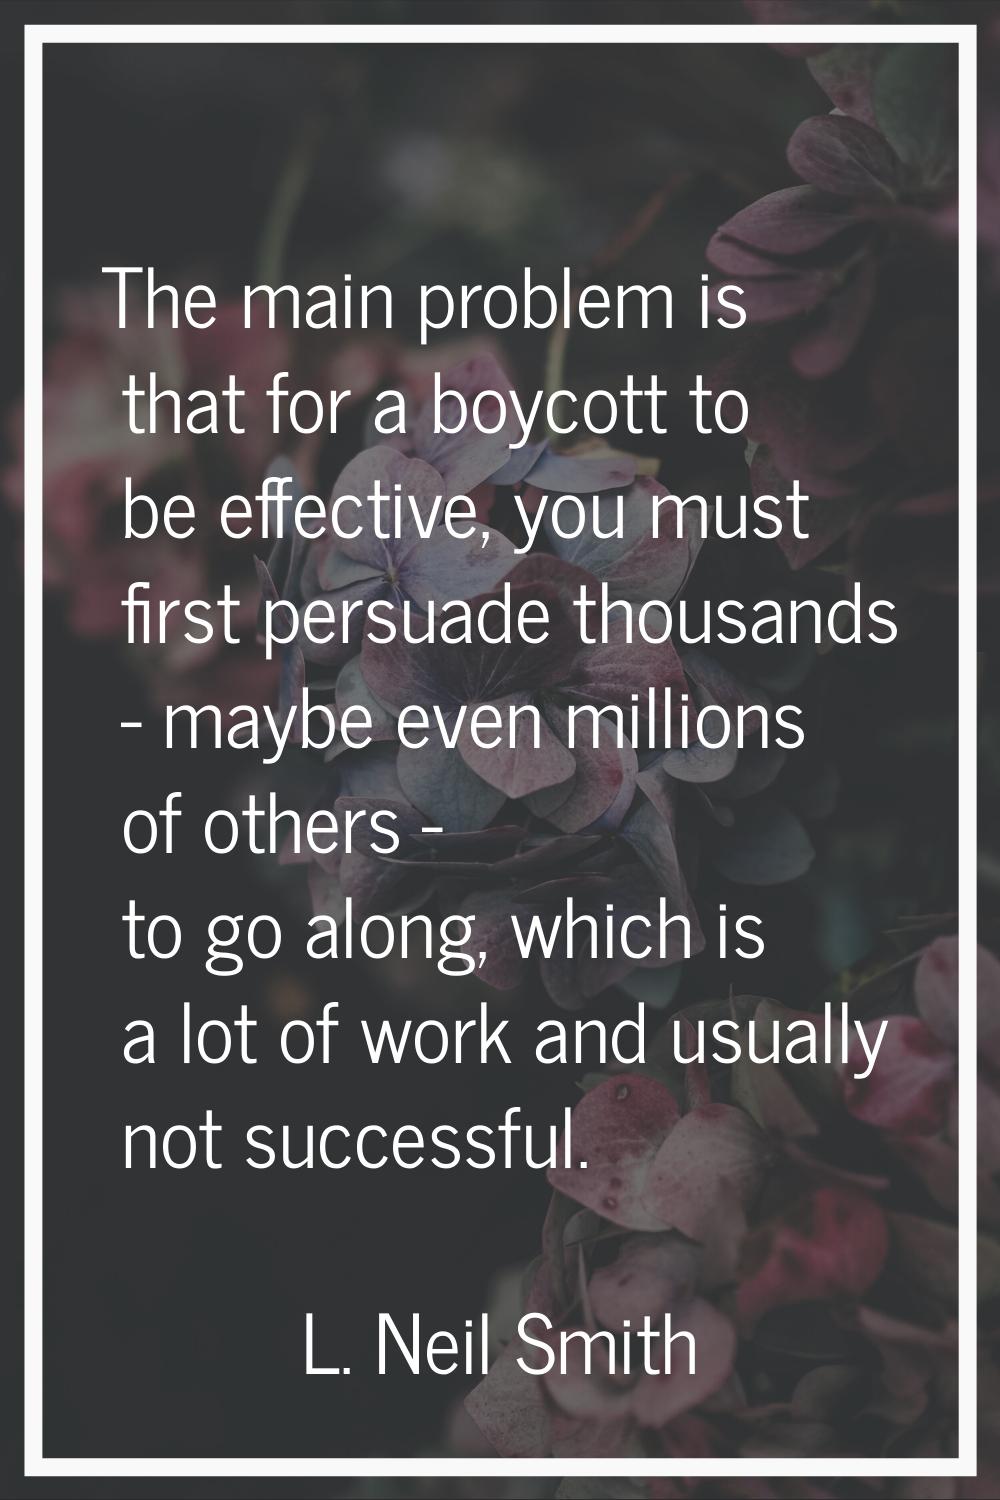 The main problem is that for a boycott to be effective, you must first persuade thousands - maybe e